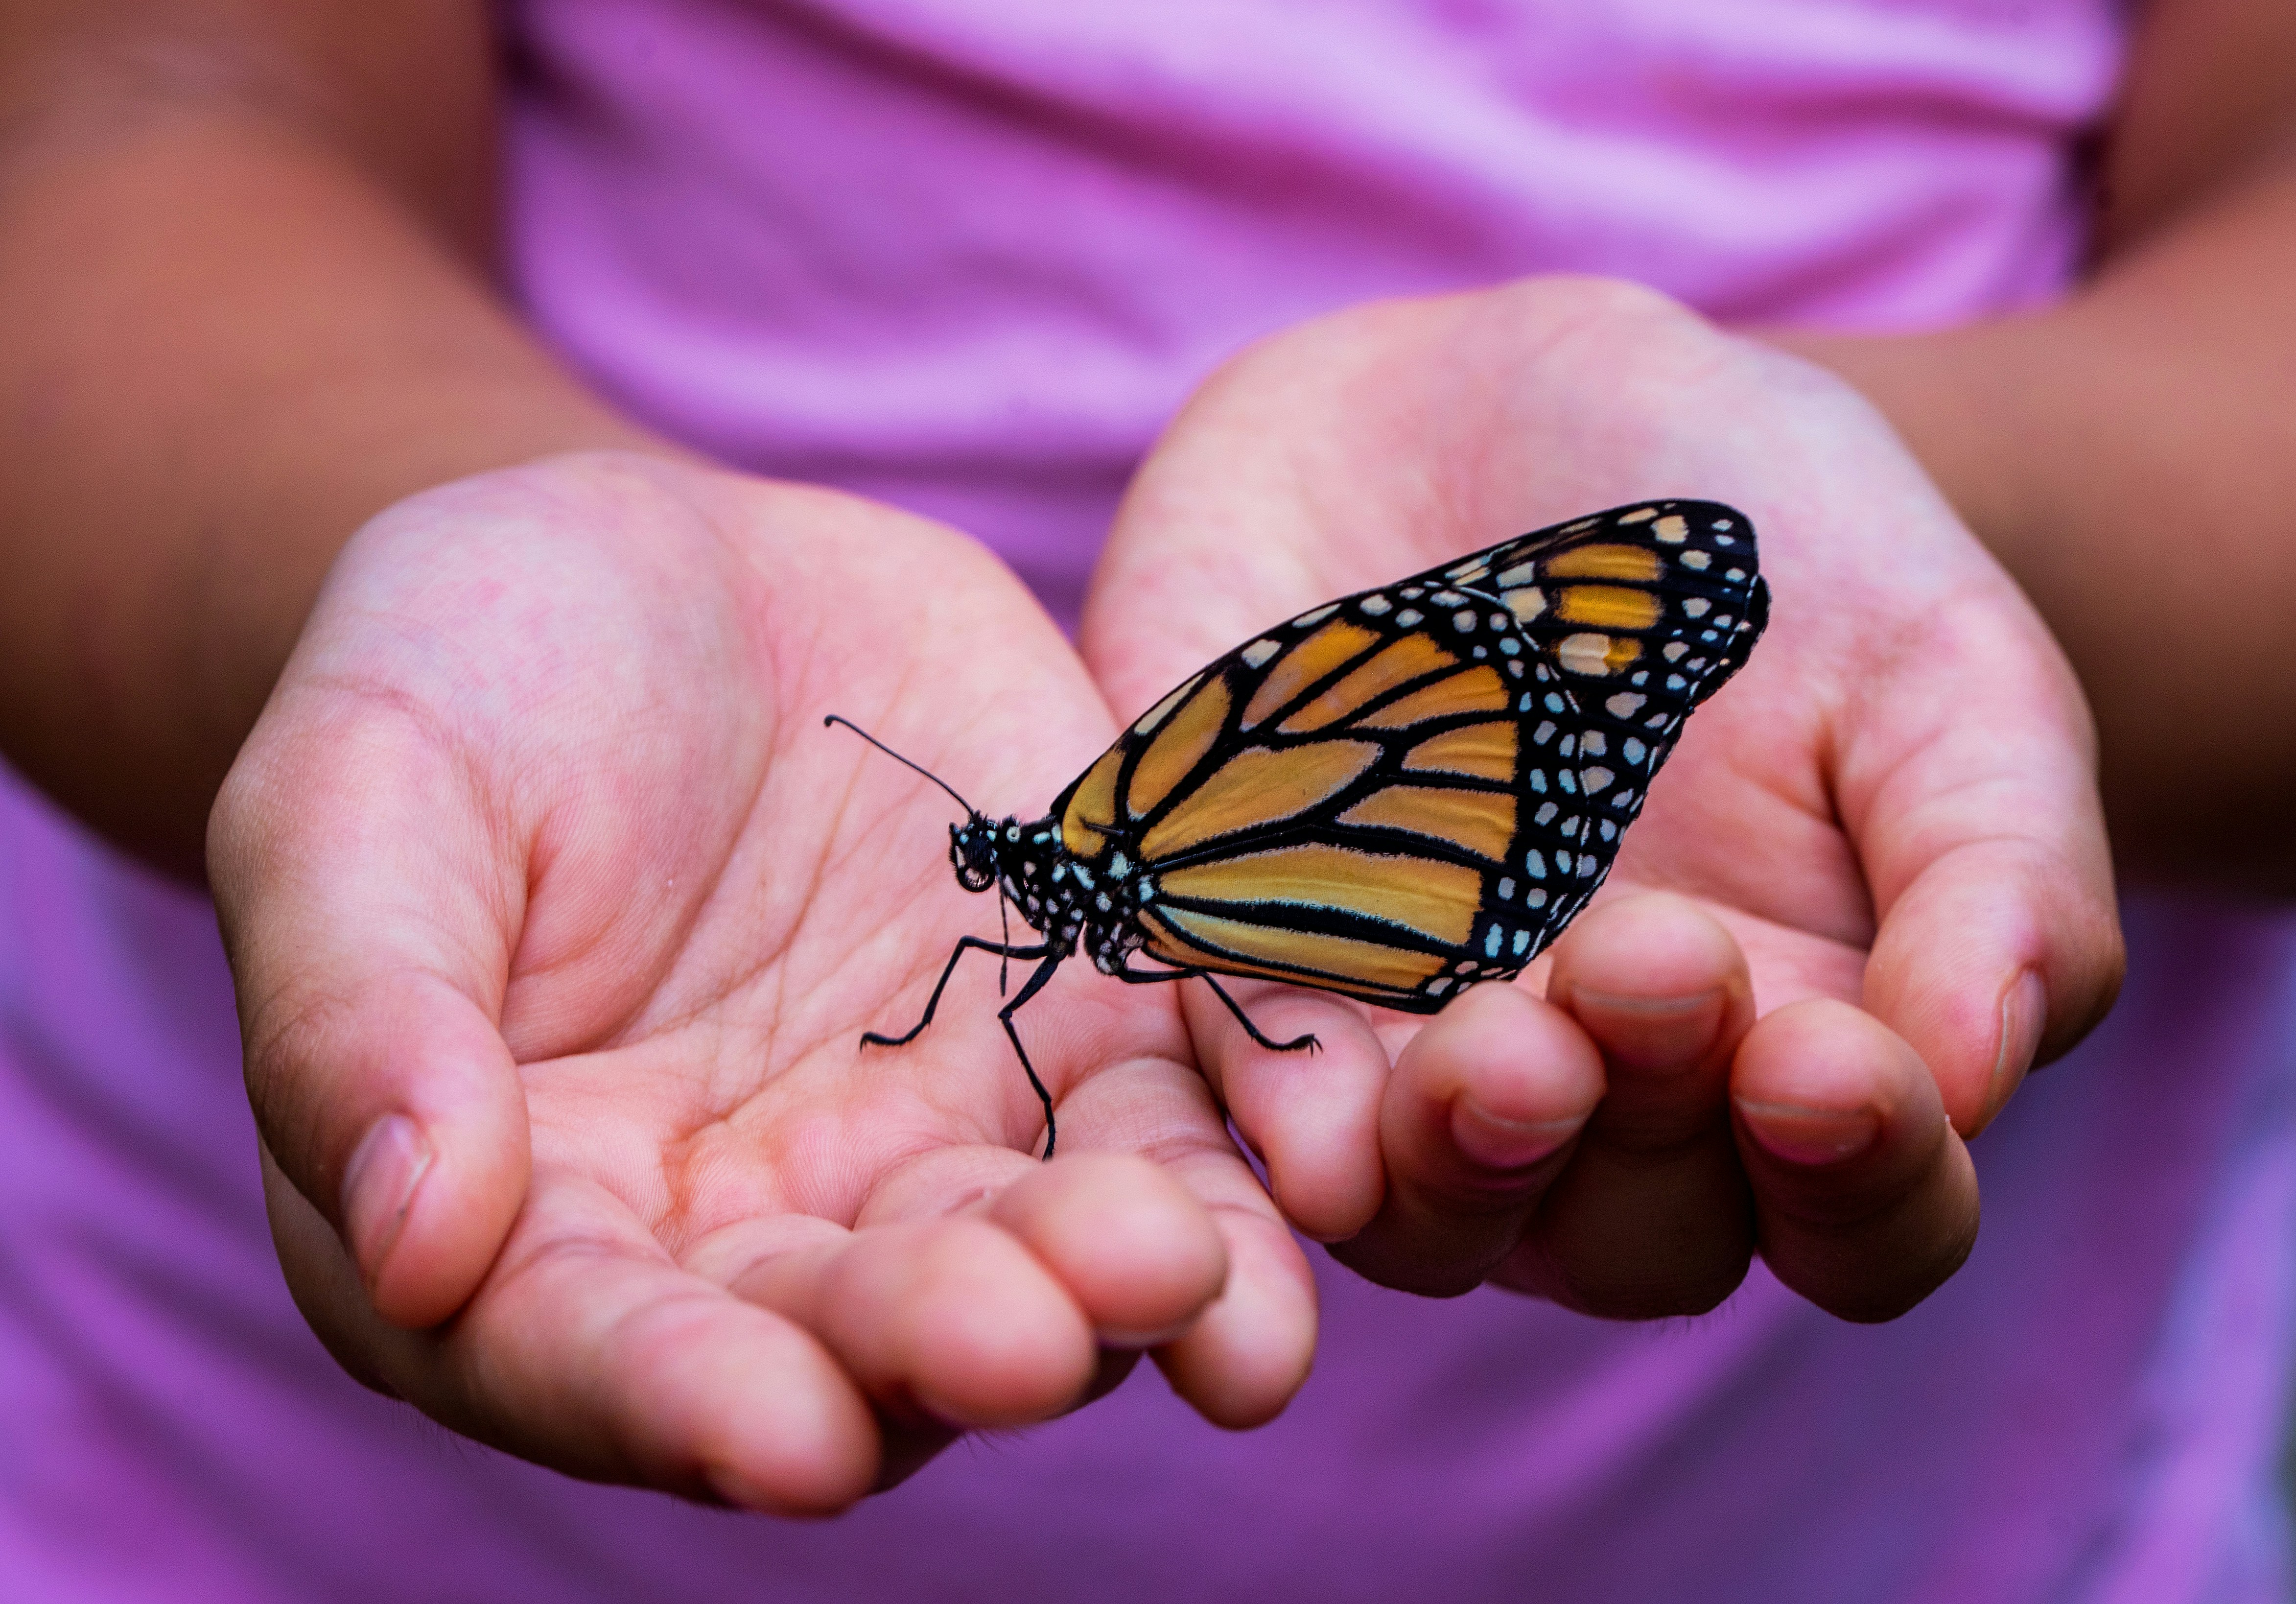 Child wearing purple shirt and hold monarch butterfly.